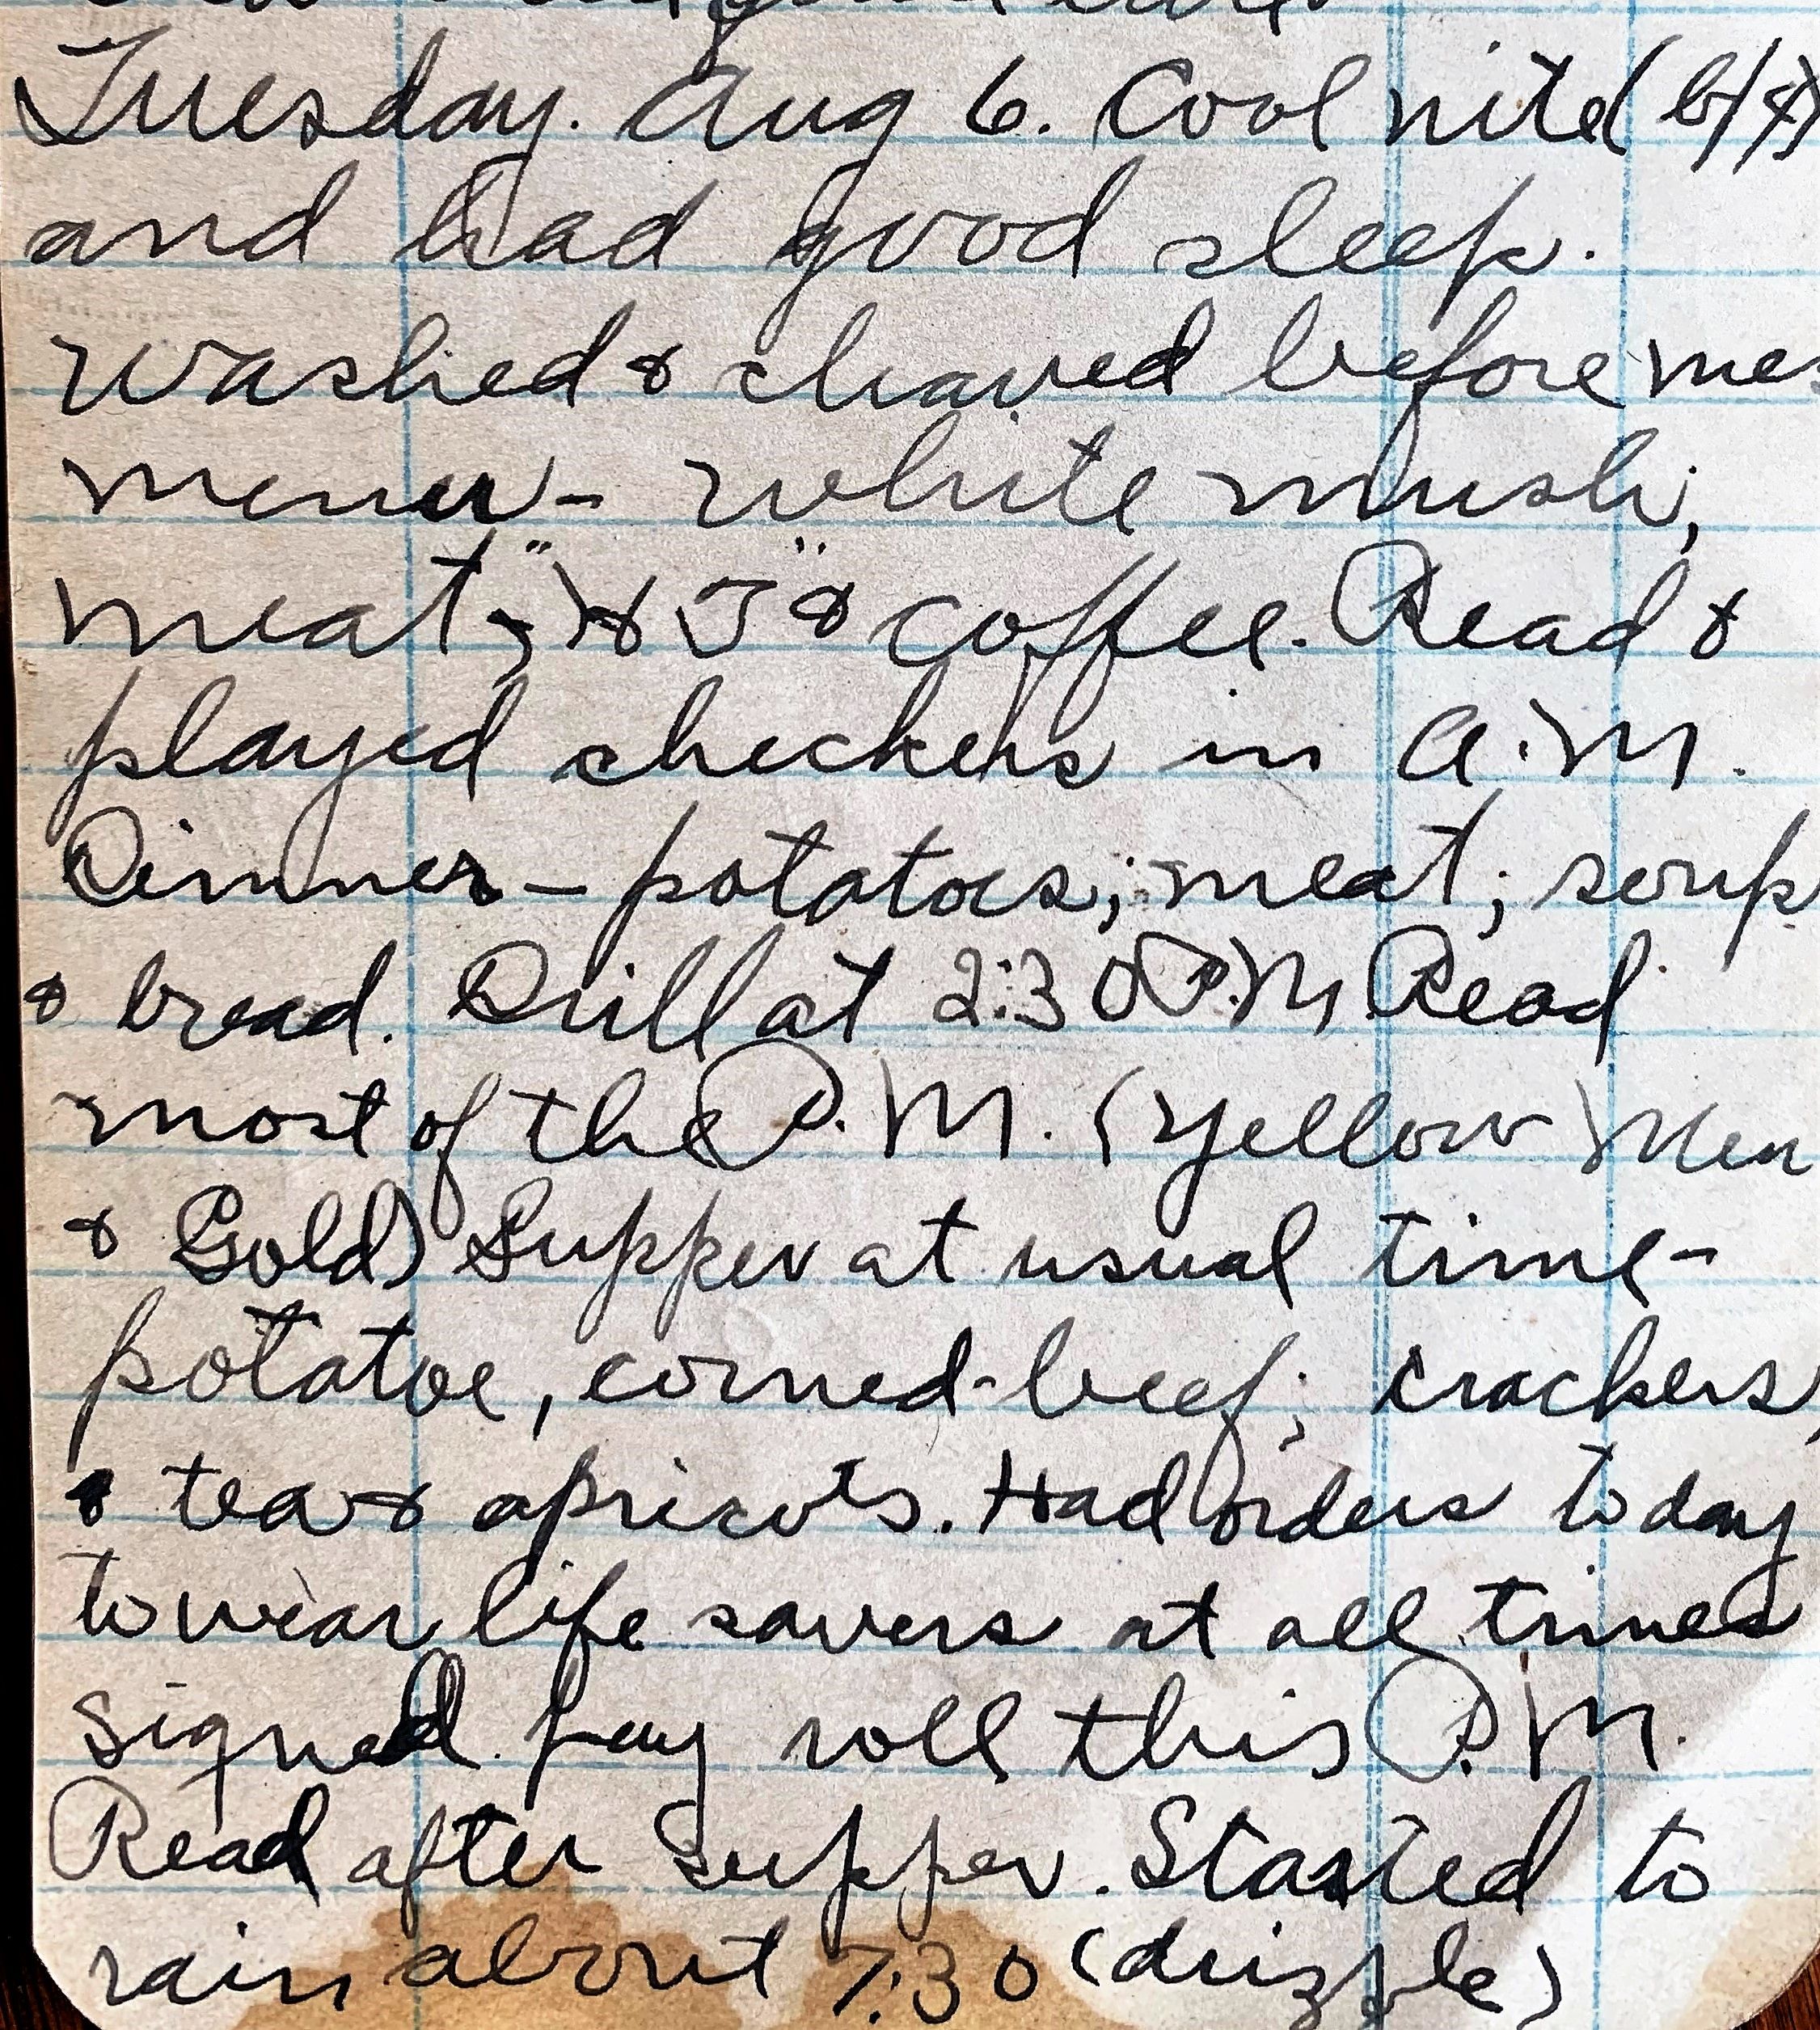 6 August 1918 Bad Weather but Some Meat